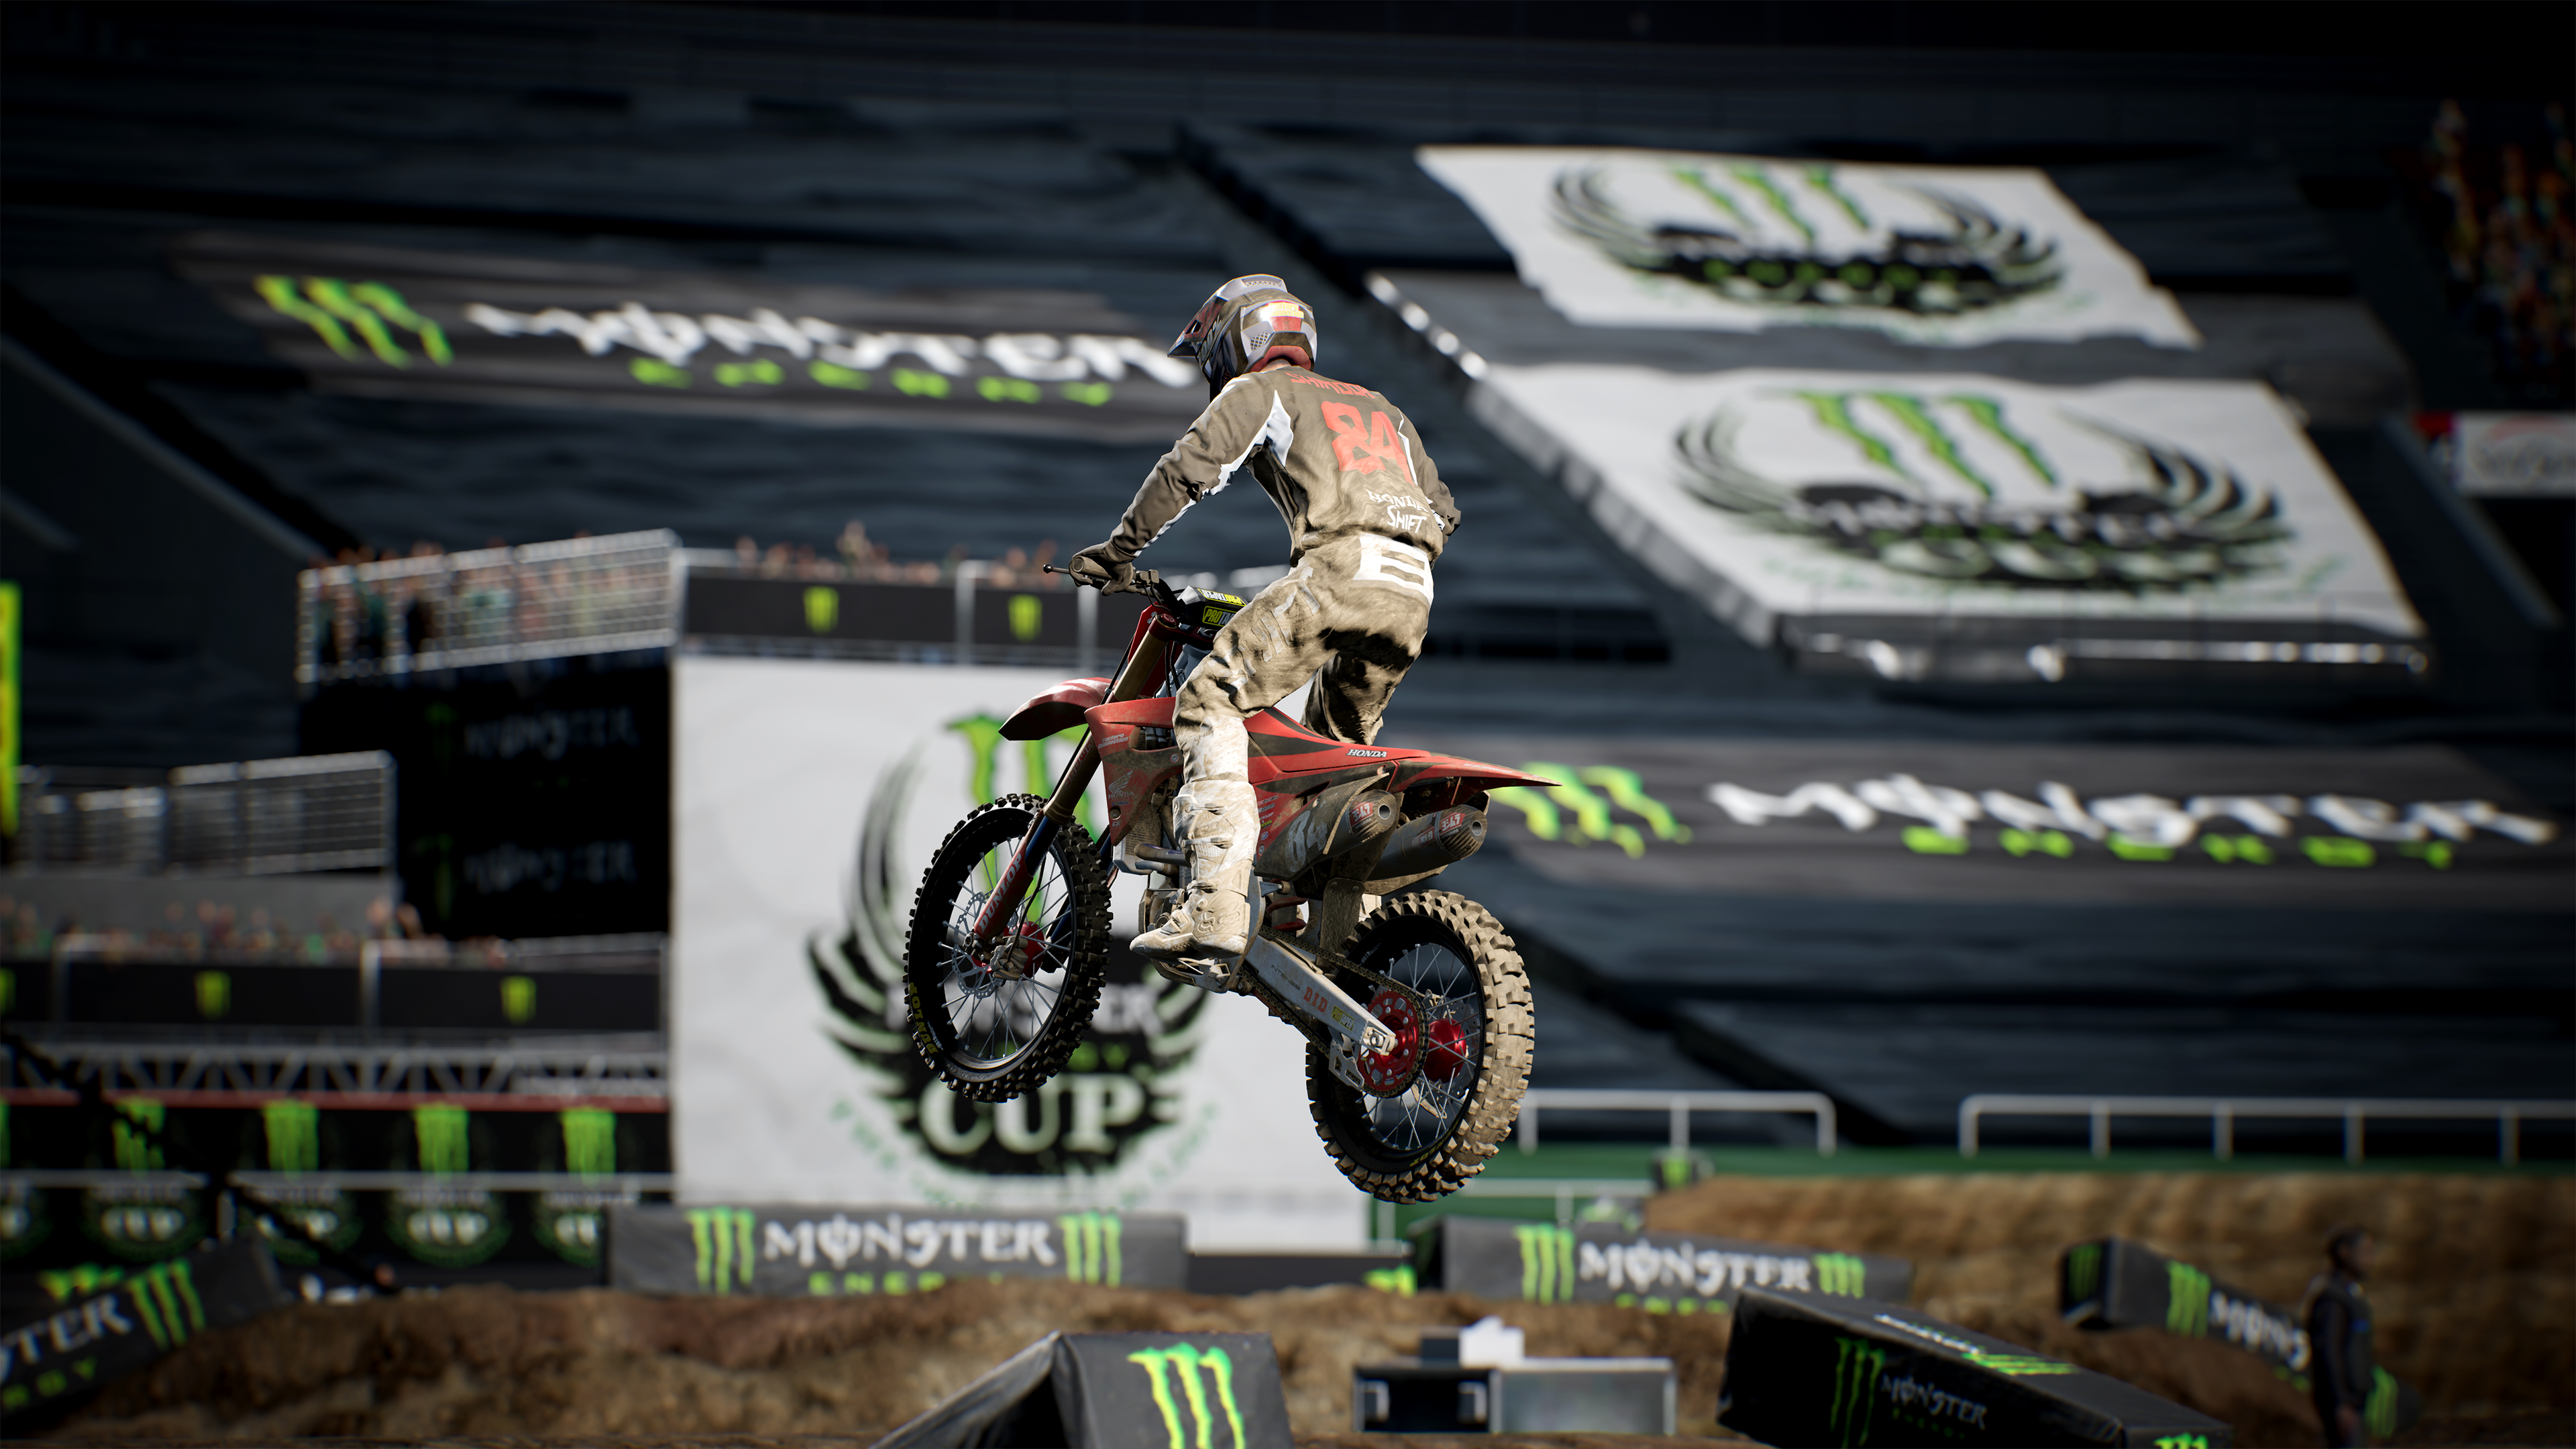 Monster Energy Cup 2021